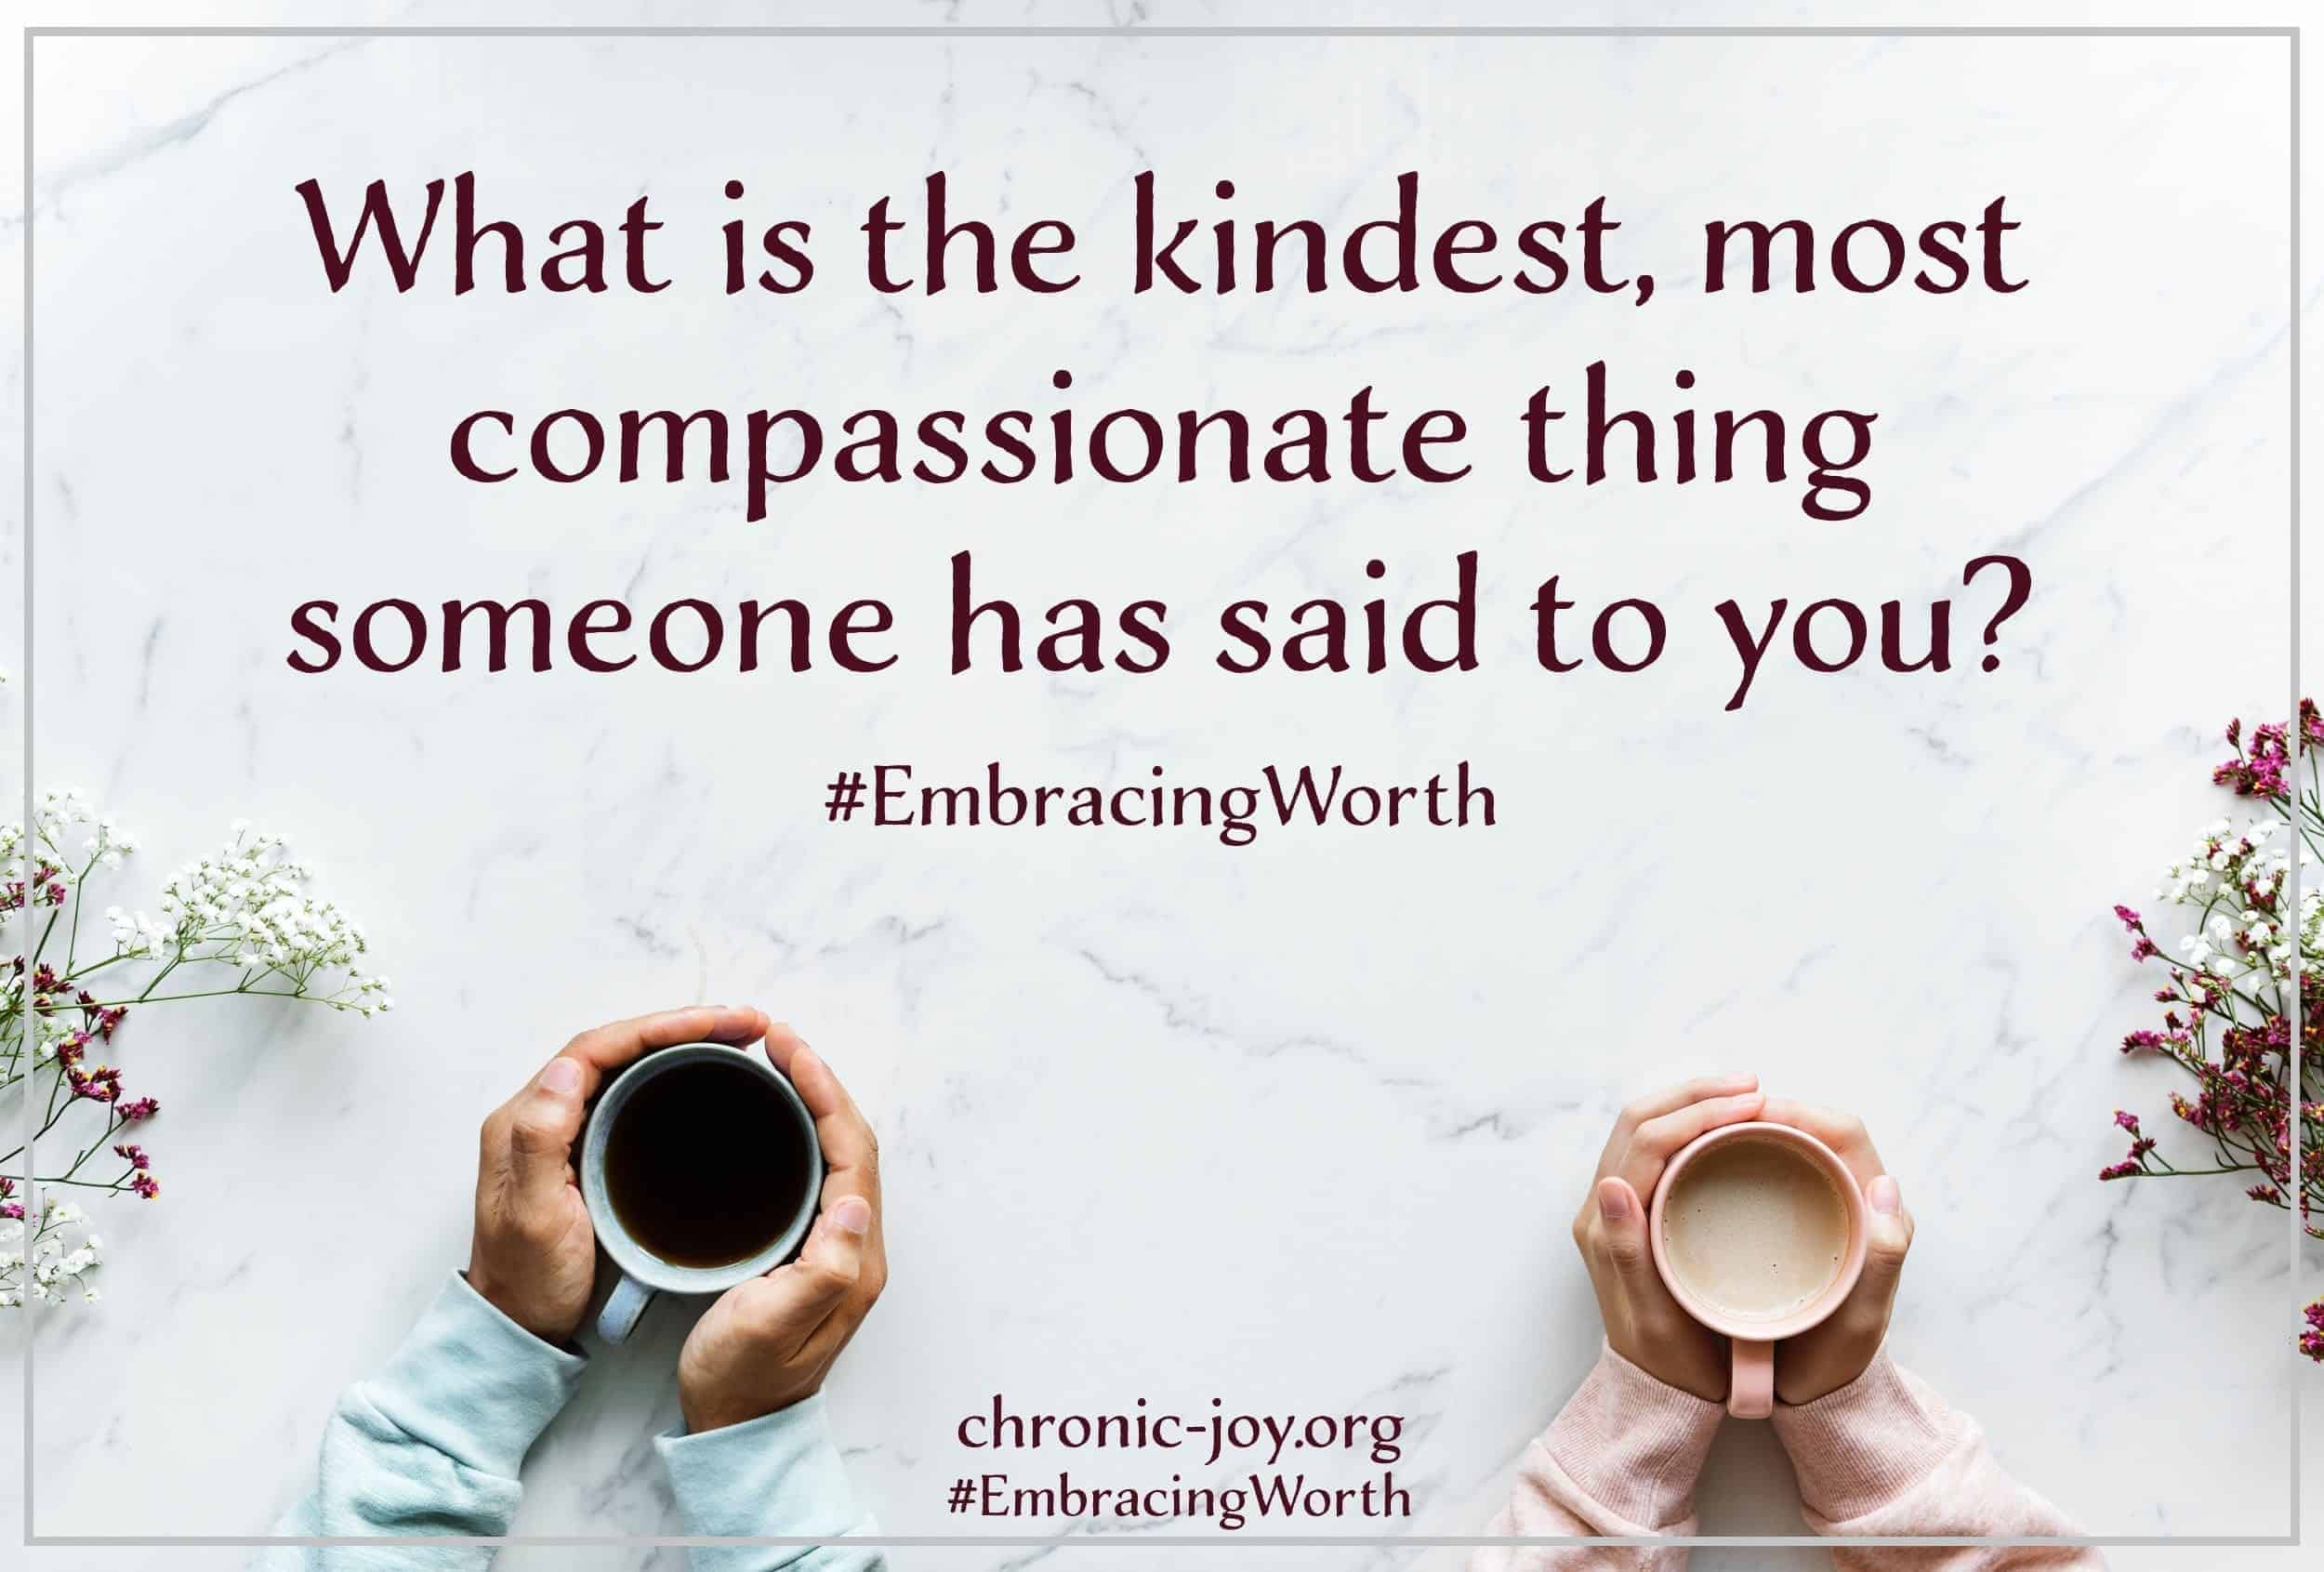 What is the kindest, most compassionate thing someone has said to you?